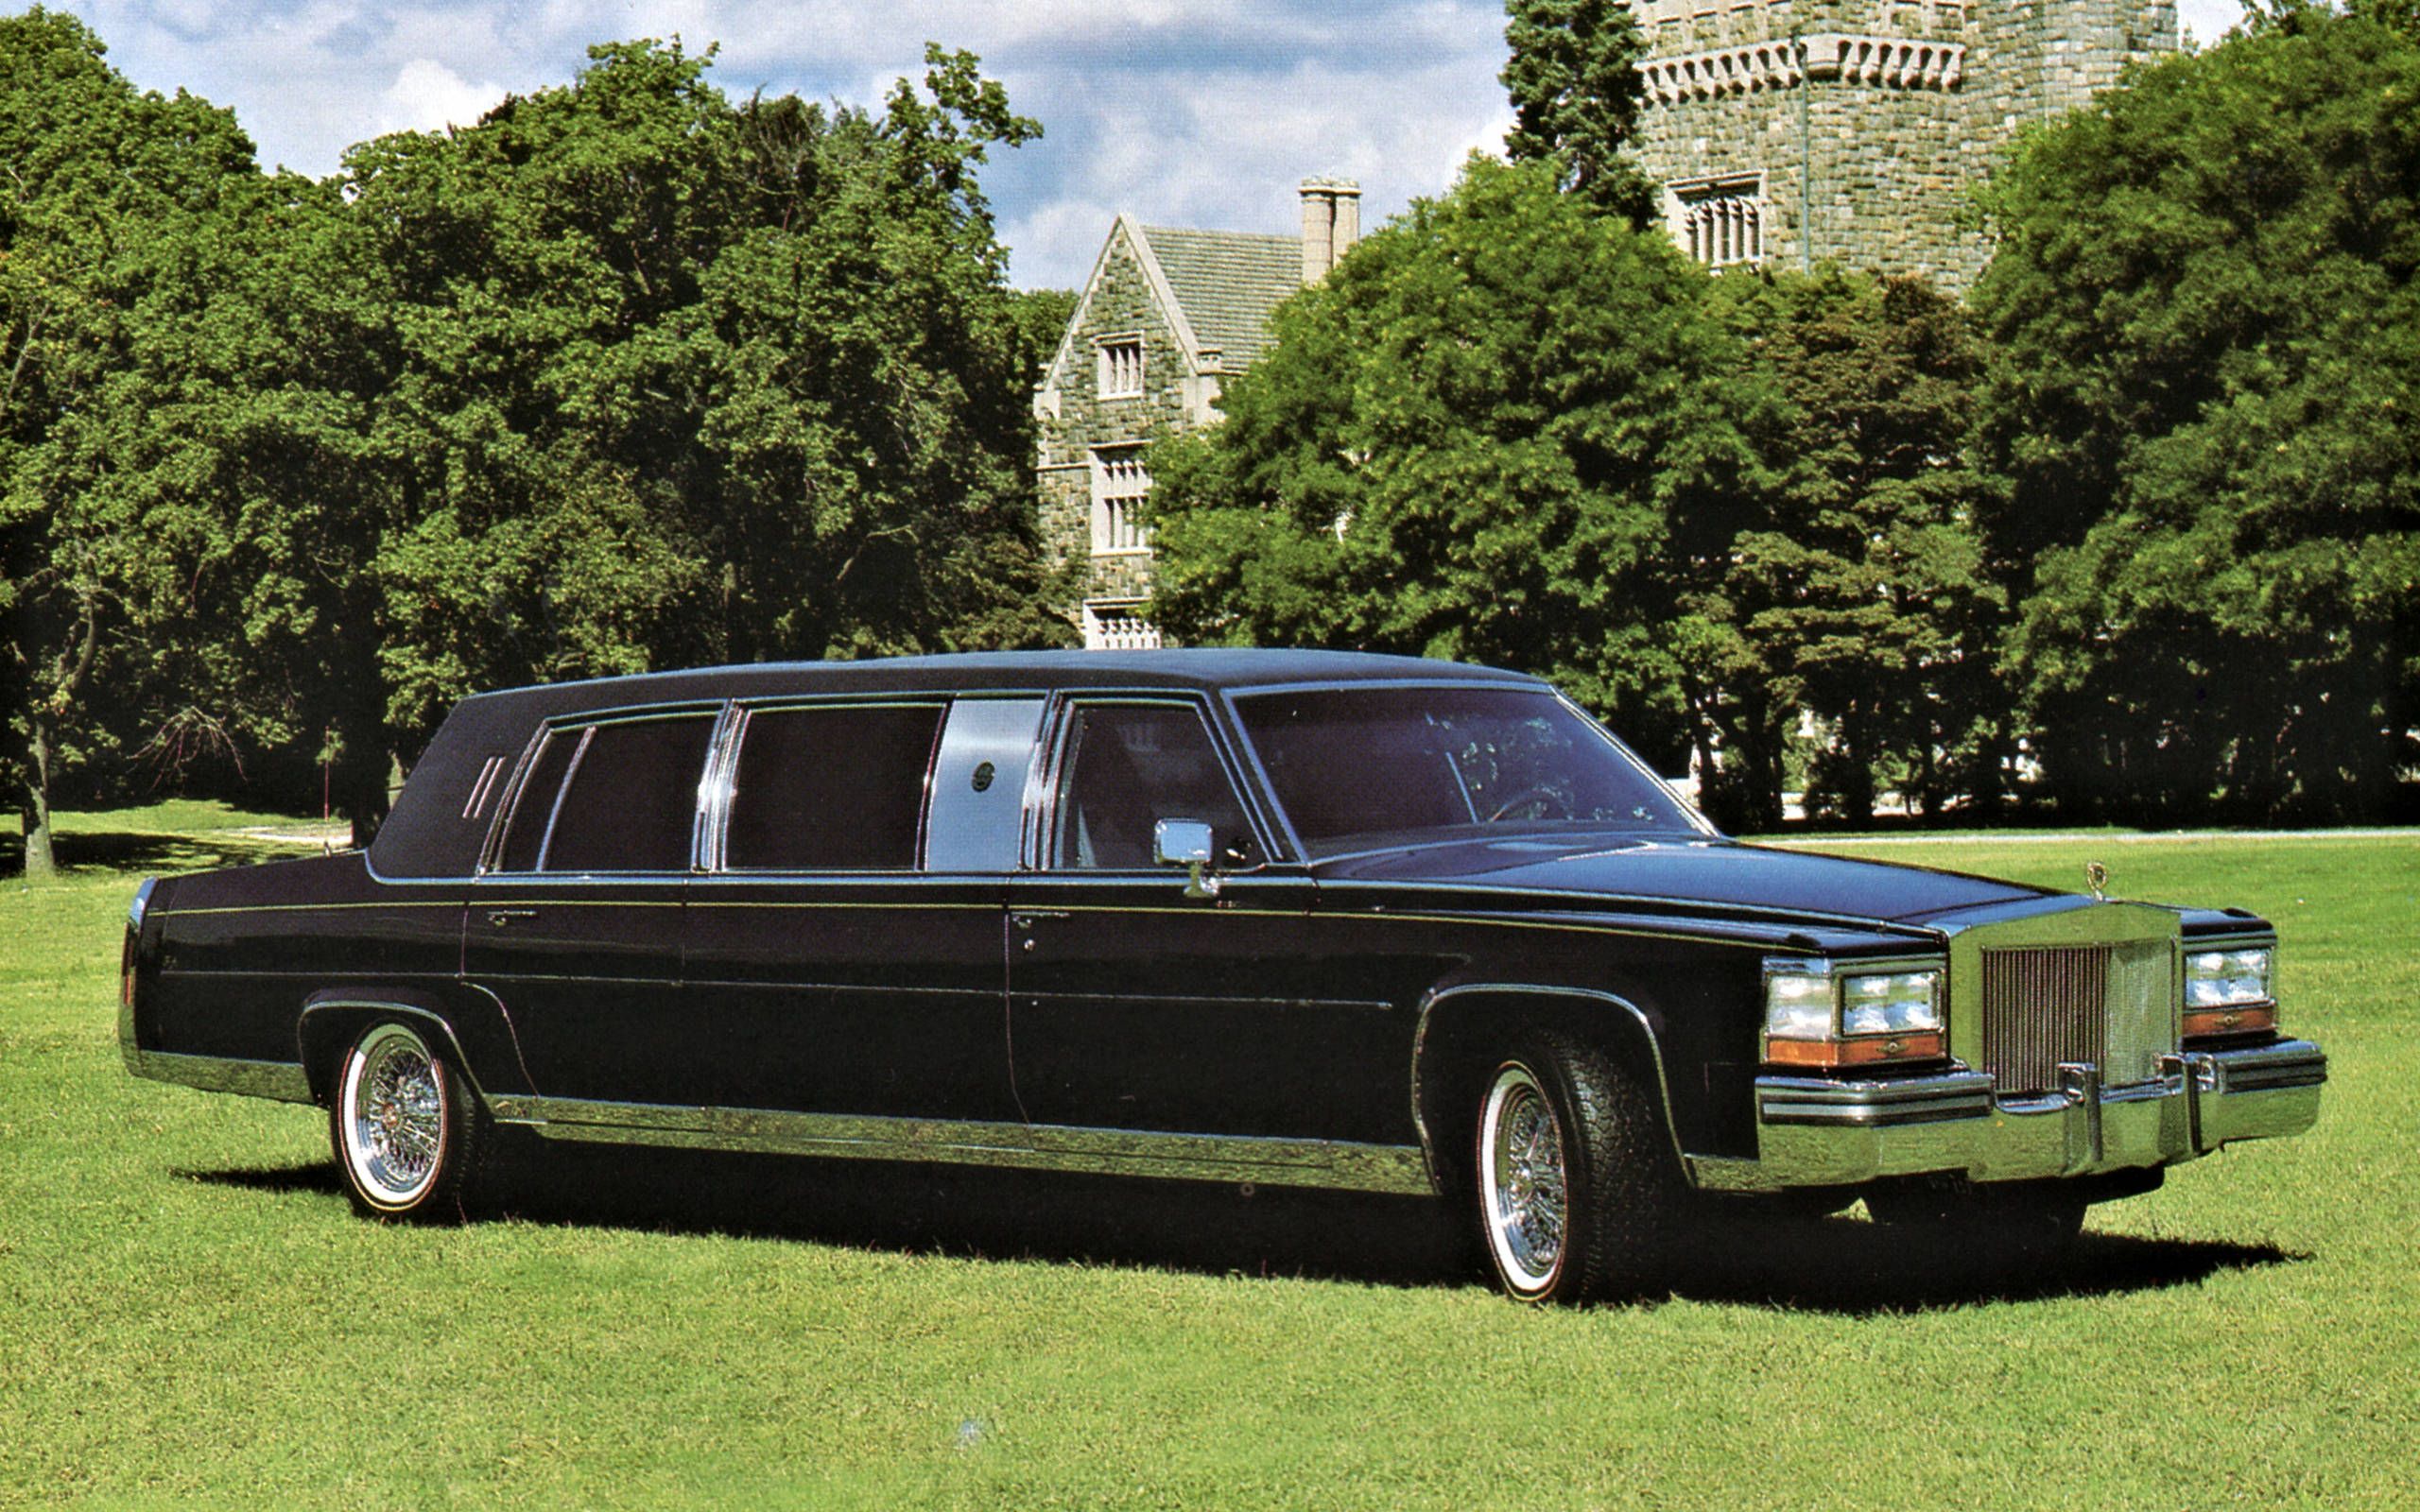 1980s, cadillac, Year In Review